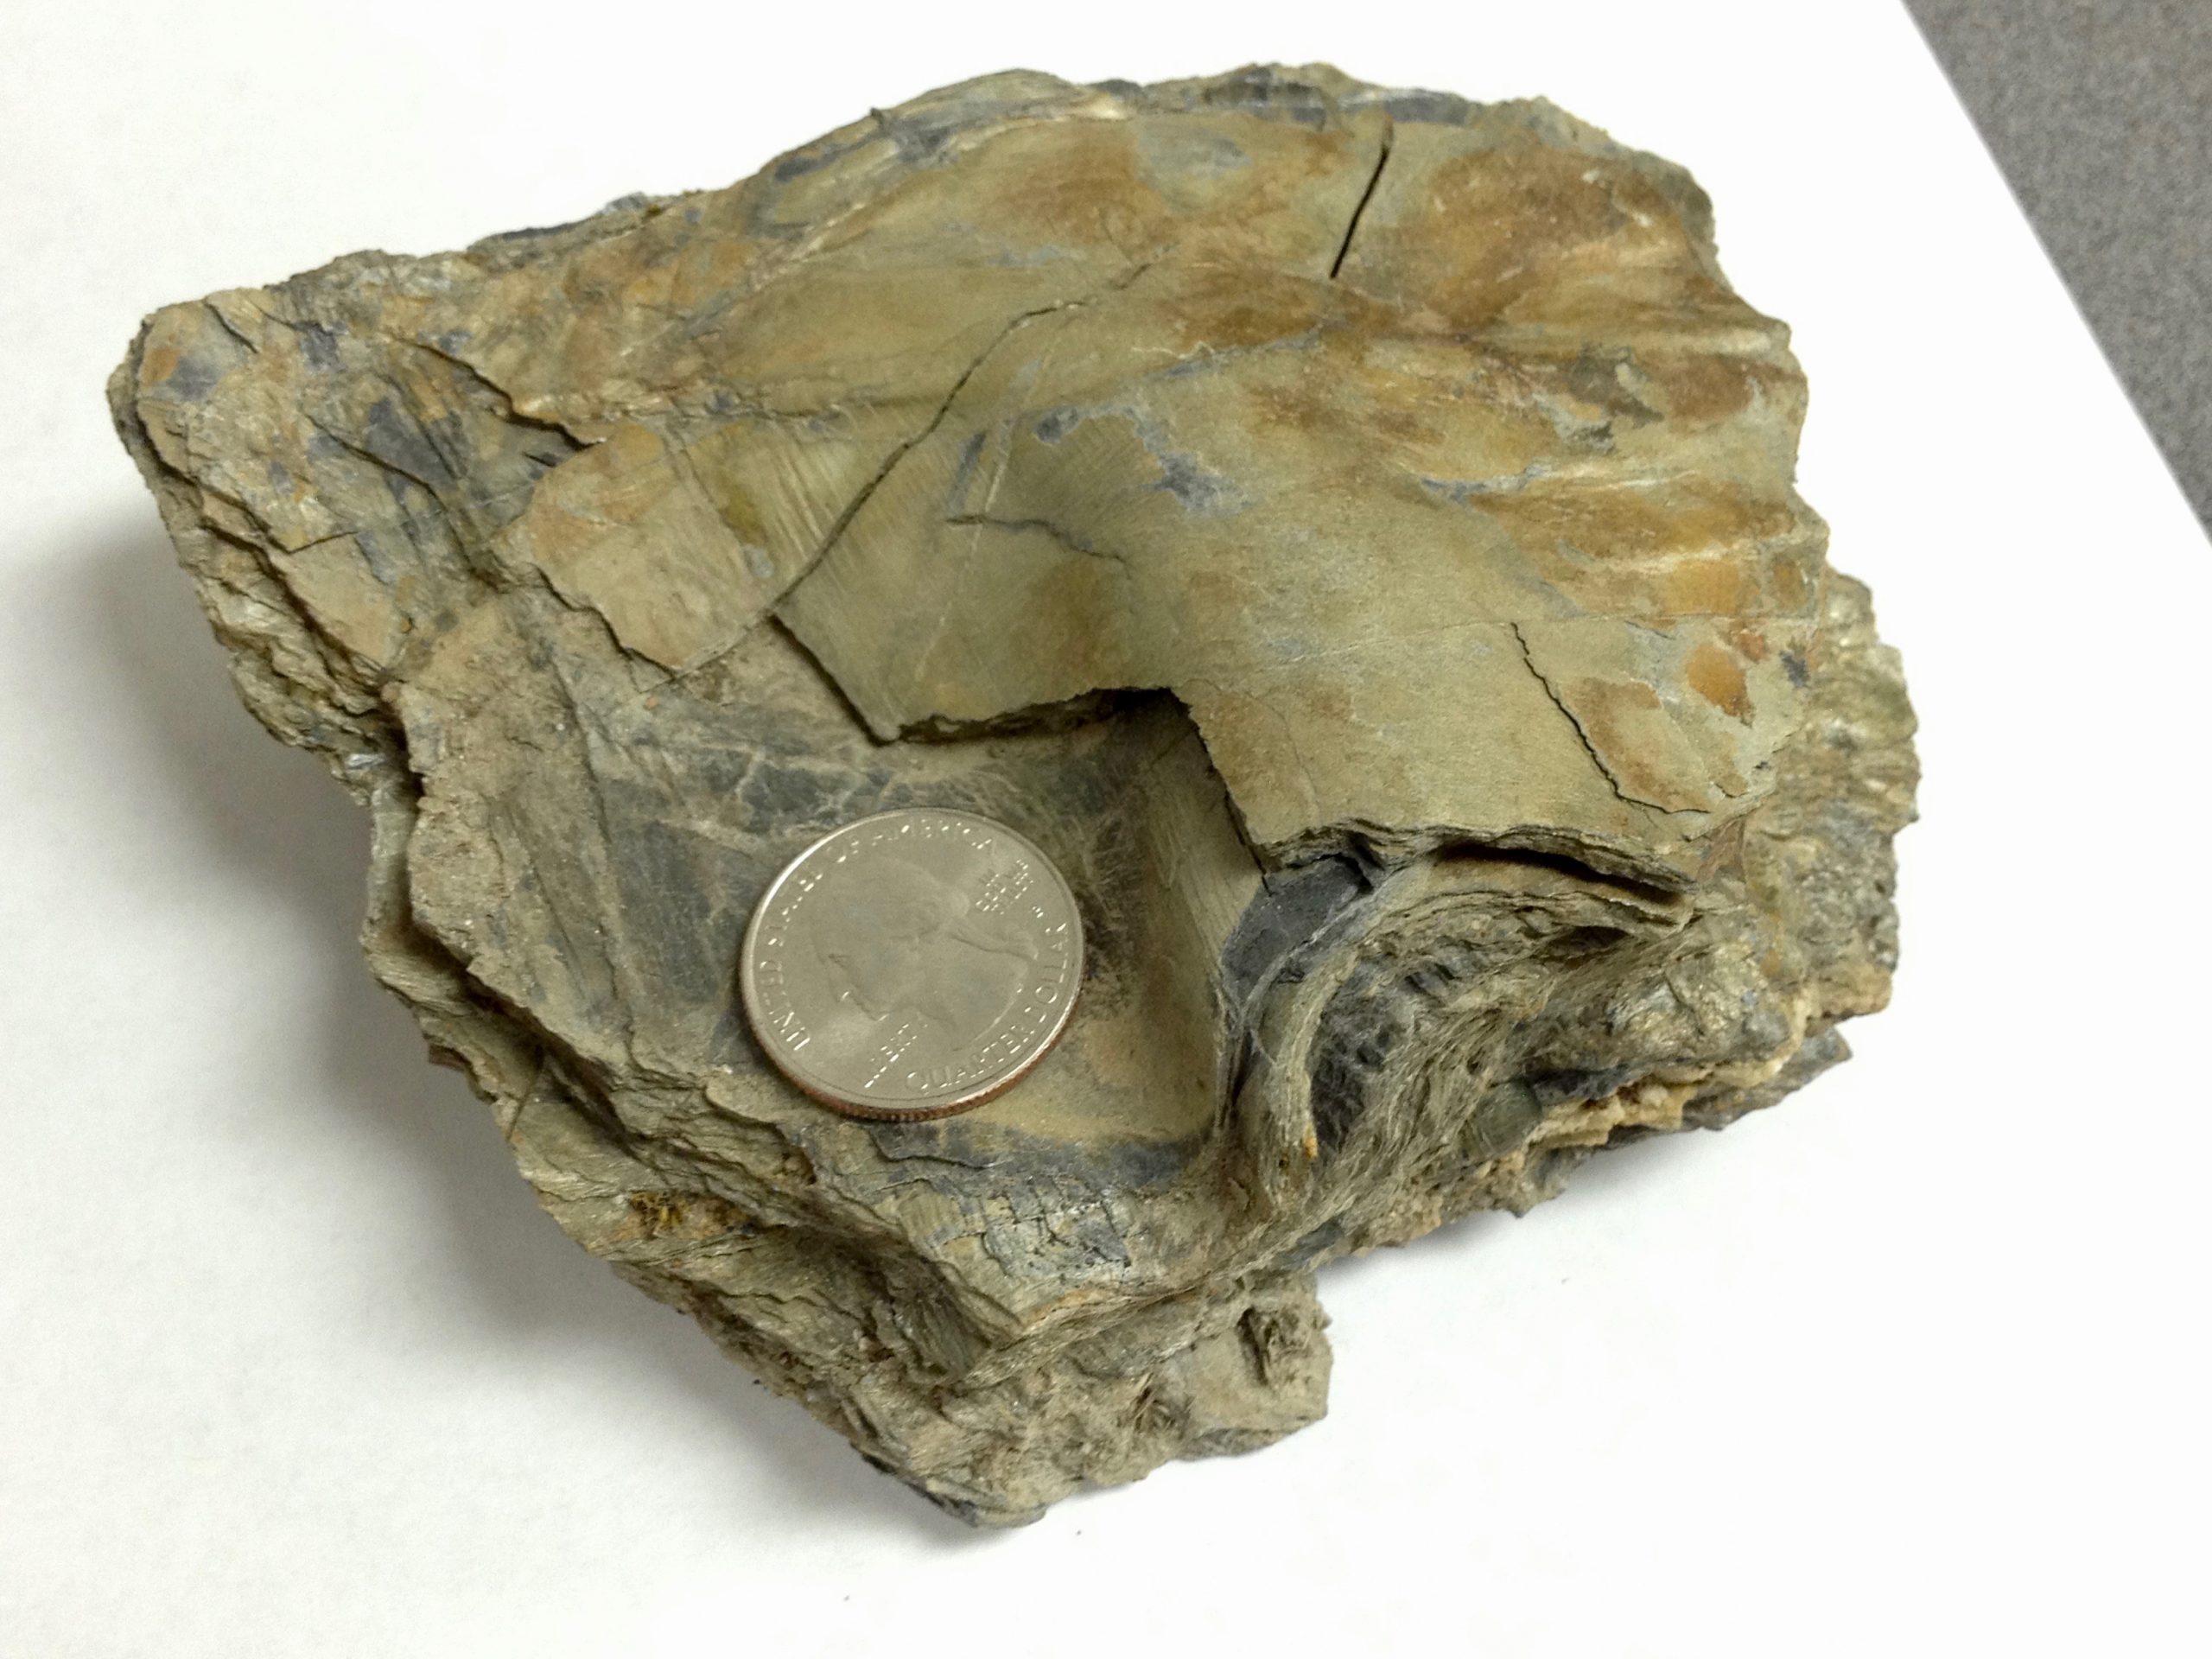 Sample of tan rock with a slight sheen that has a small fold and thin layering; a US quarter rests on top of it for scale.